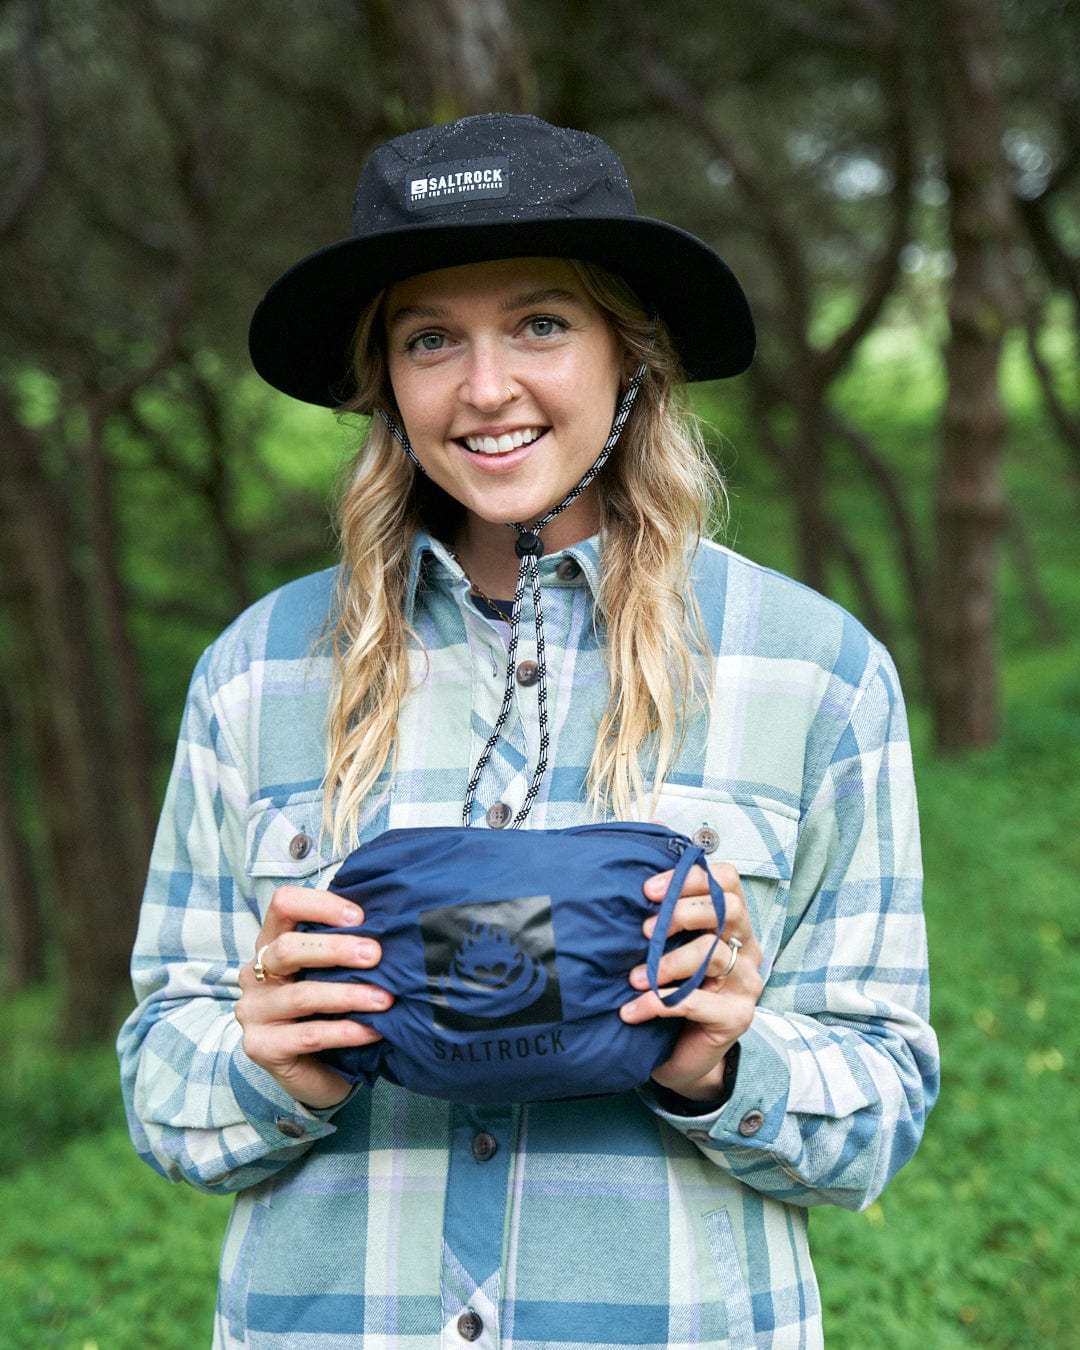 A smiling young woman in a plaid shirt and Saltrock waterproof jacket holds a Cooper - Womens Packable Waterproof Jacket - Blue bag in a lush green forest setting.